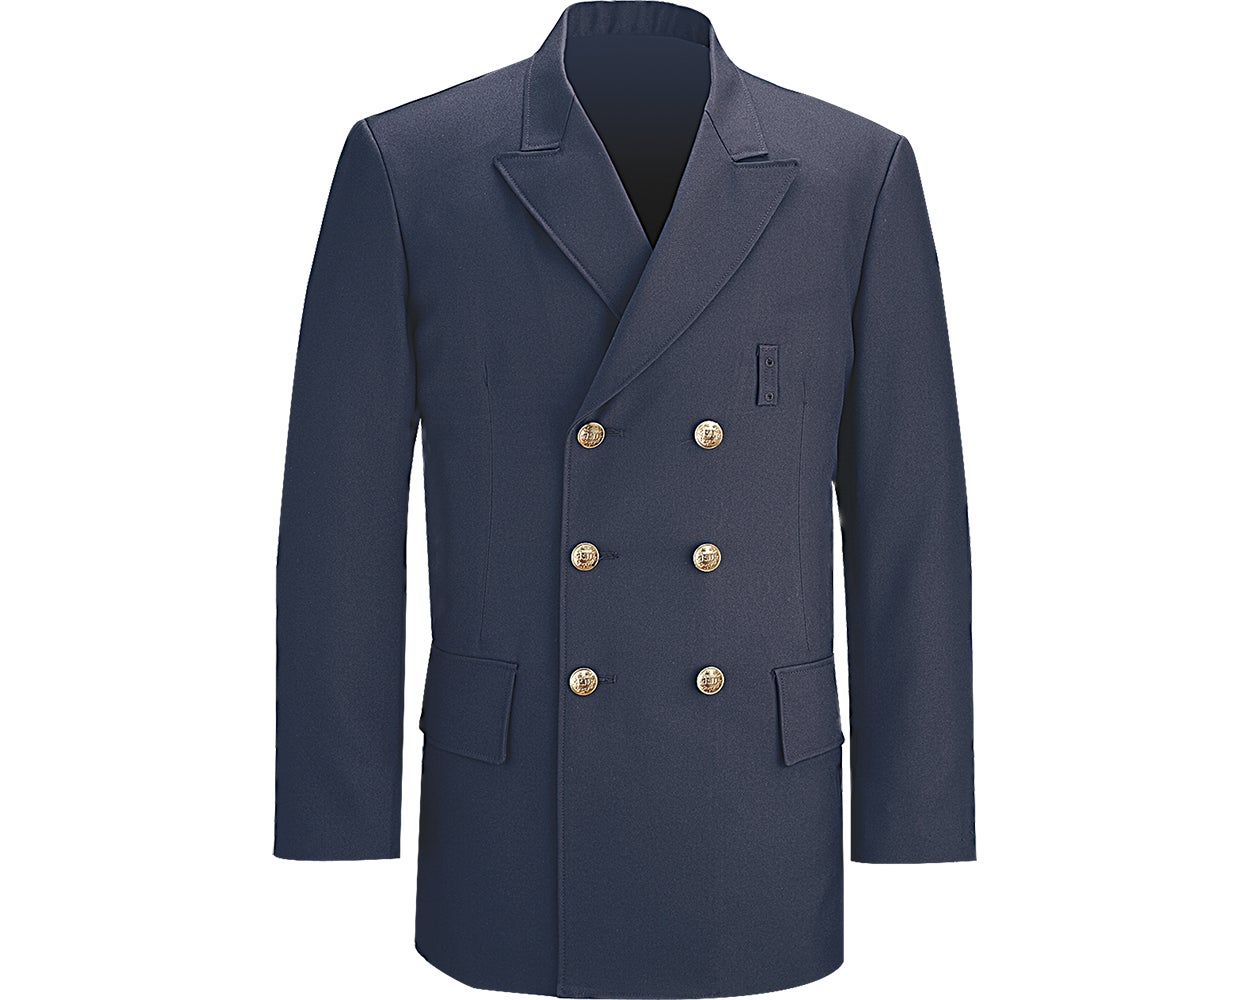 Flying Cross COMMAND 100% POLYESTER MEN'S DOUBLE BREASTED DRESS COAT - F1 38804